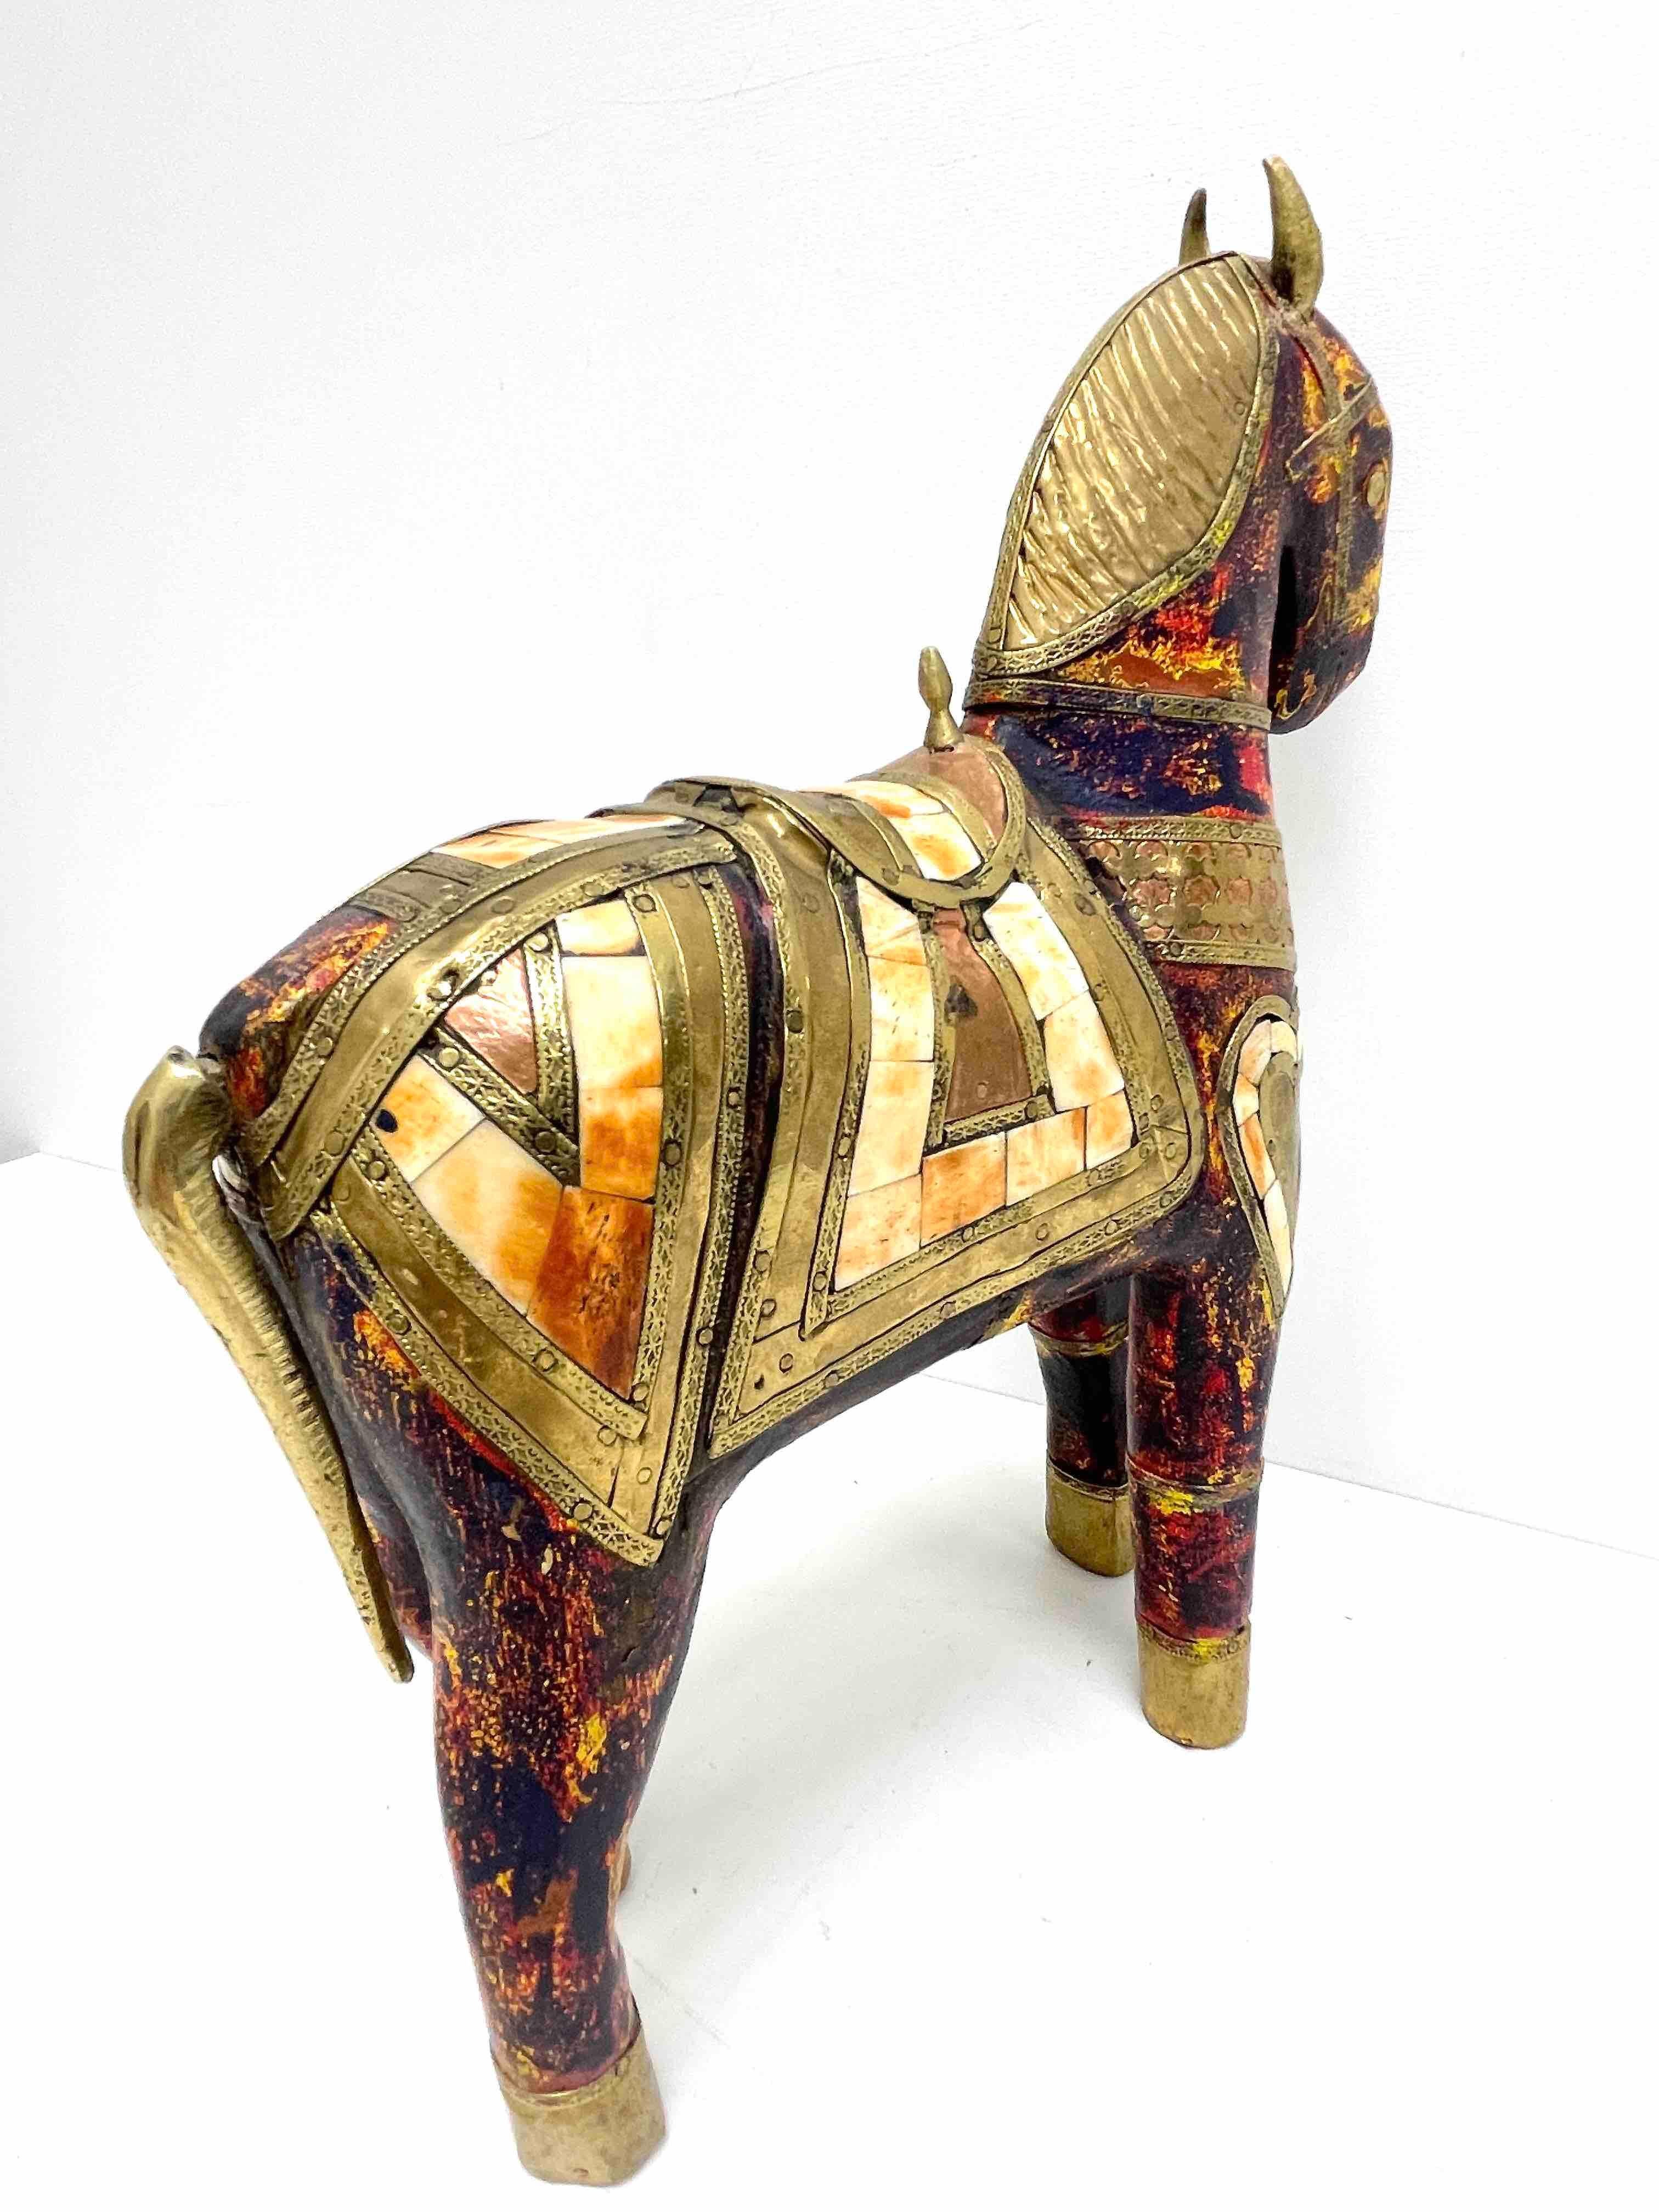 A beautiful decorative horse statue. Some wear with a nice patina, but this is old-age. Wooden horse colored in red, with some metal and stone parts. Very decorative and nice to display in your library or any room.